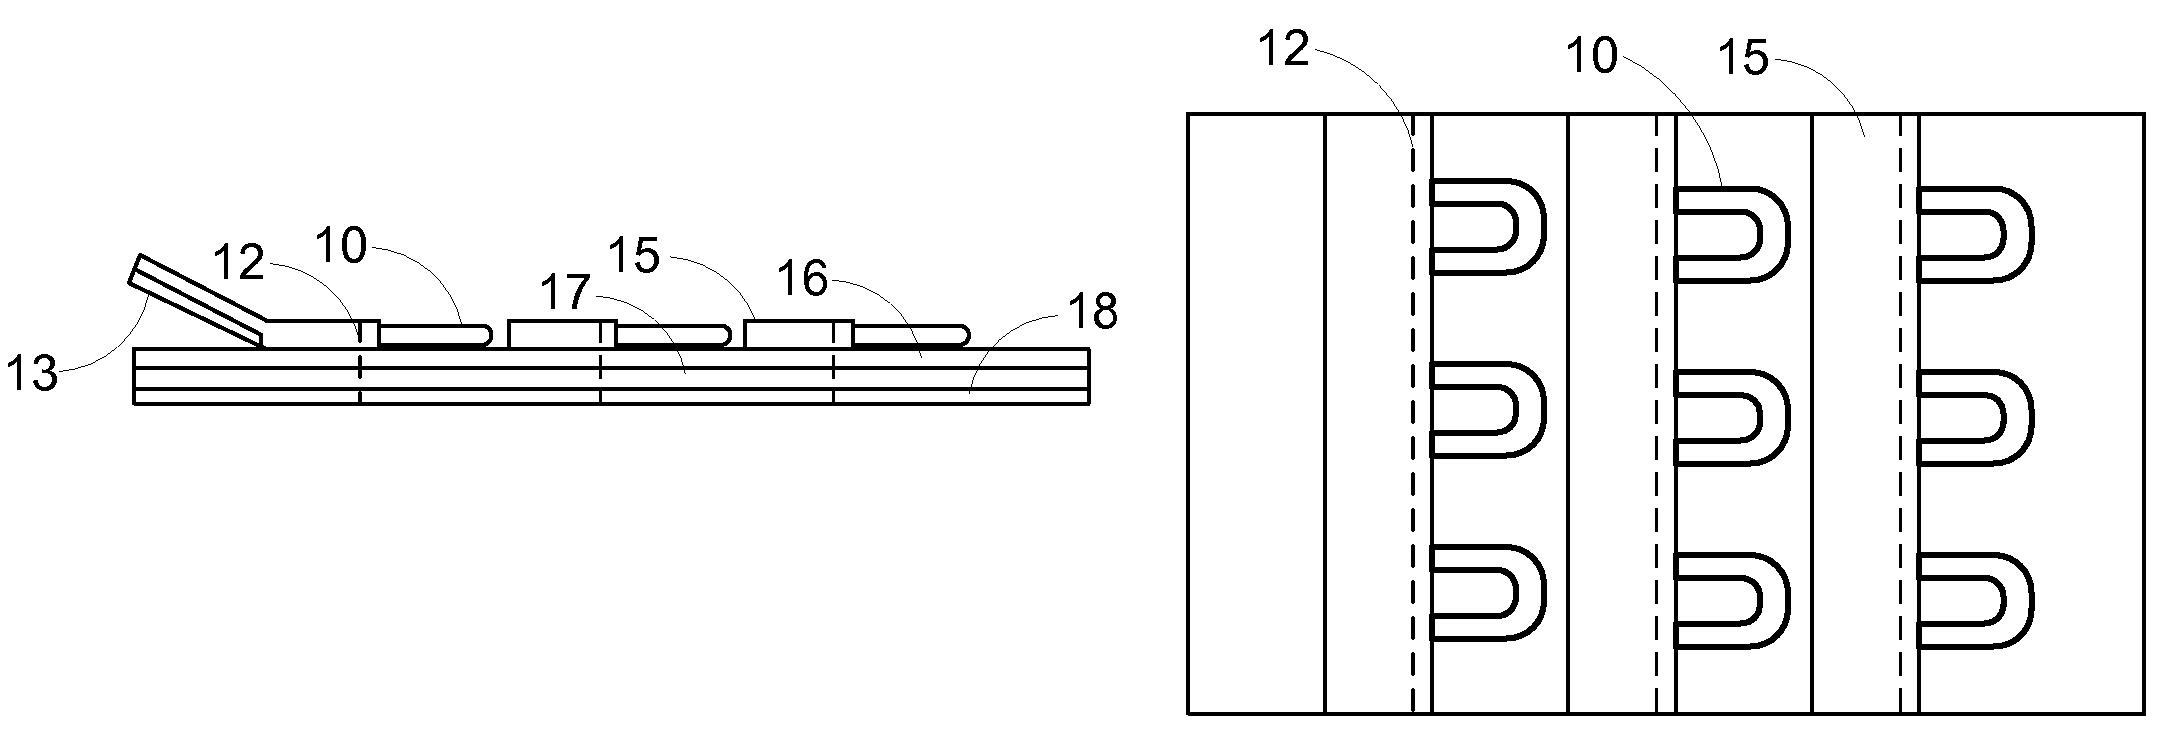 Apparatus and method for comfortably and dynamically adjusting the girth of a garment fastened by hook and eye